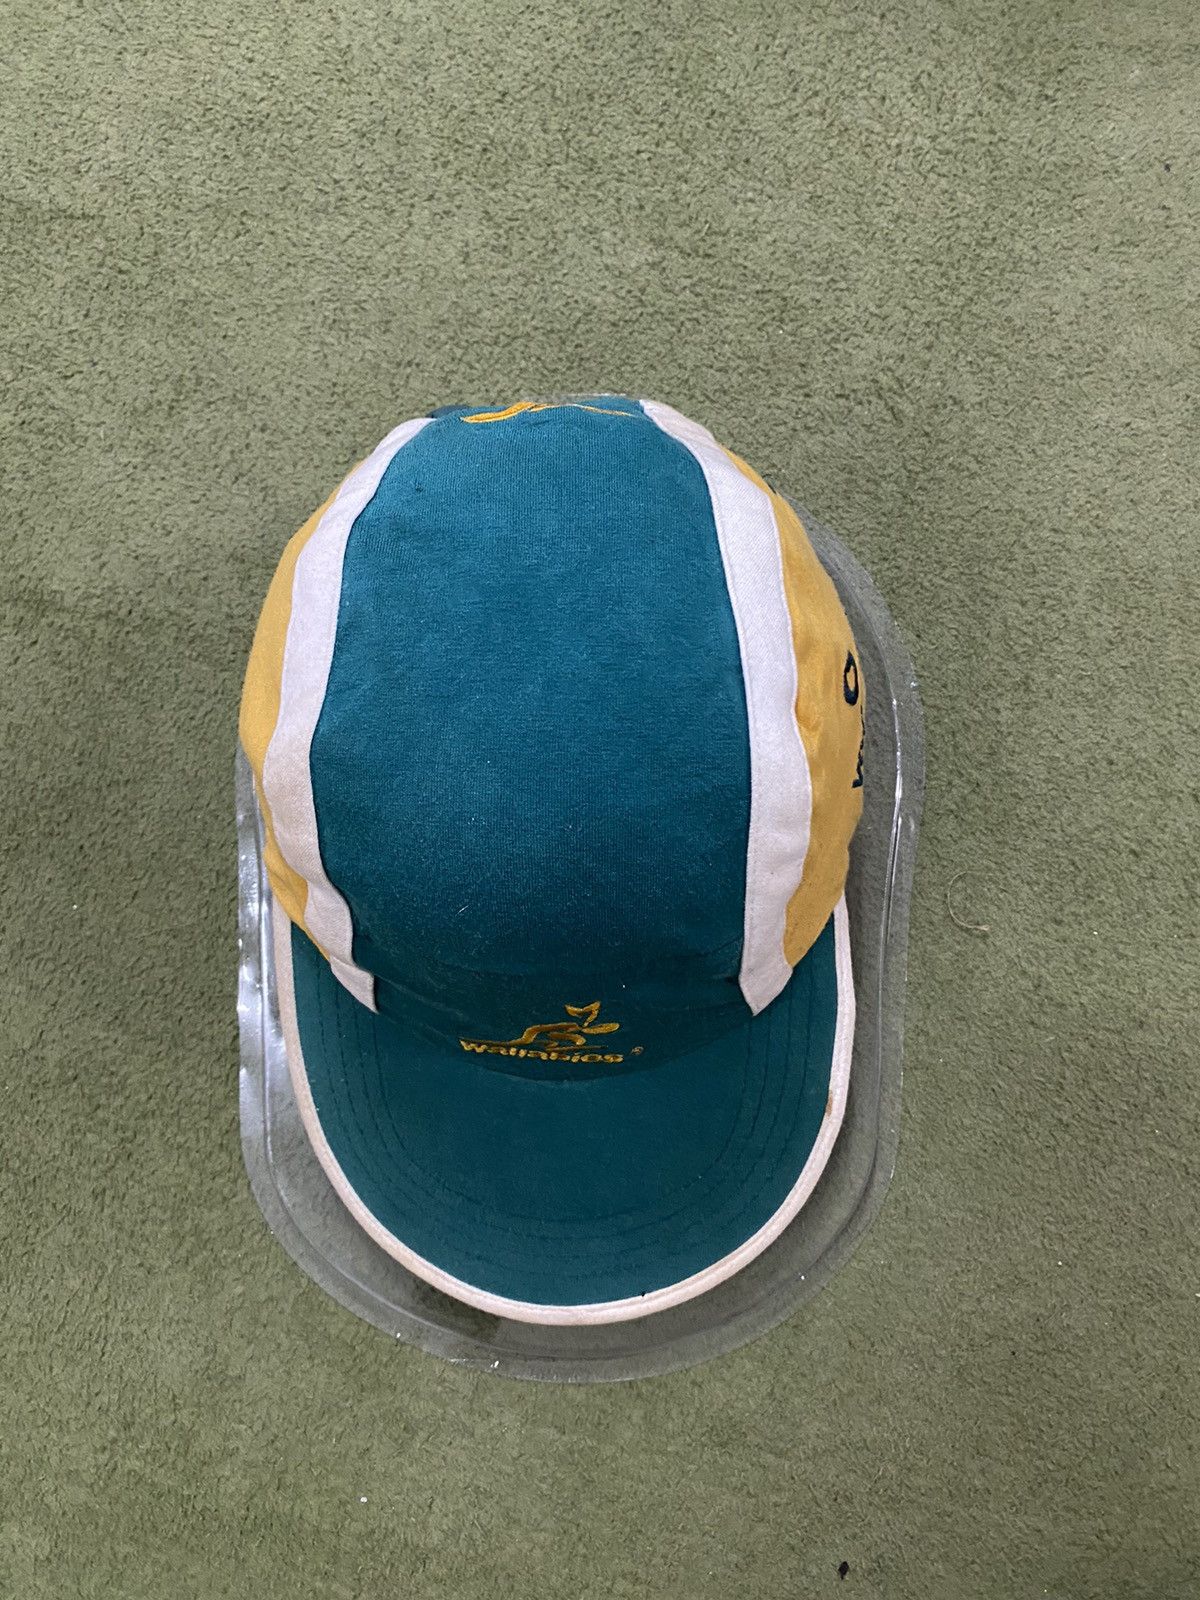 Vintage - Rare Iconic Canterbury Australia Wallabies Rugby Hats - 5